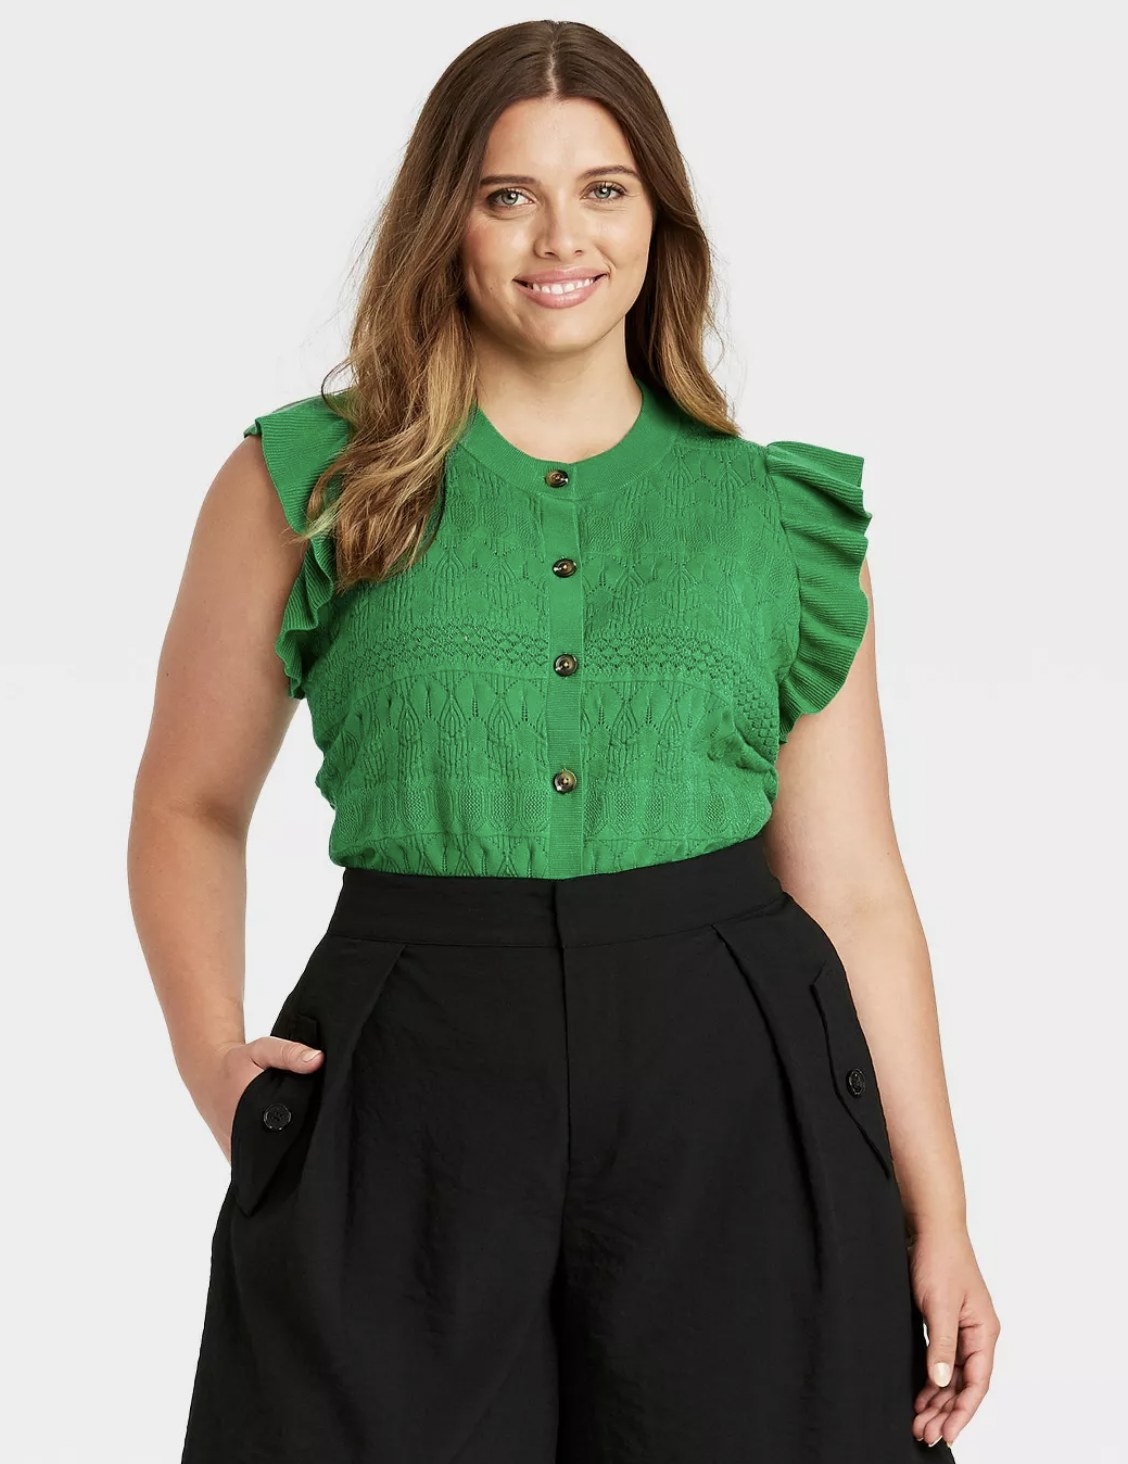 model wearing the sweater vest with ruffled sleeves in green